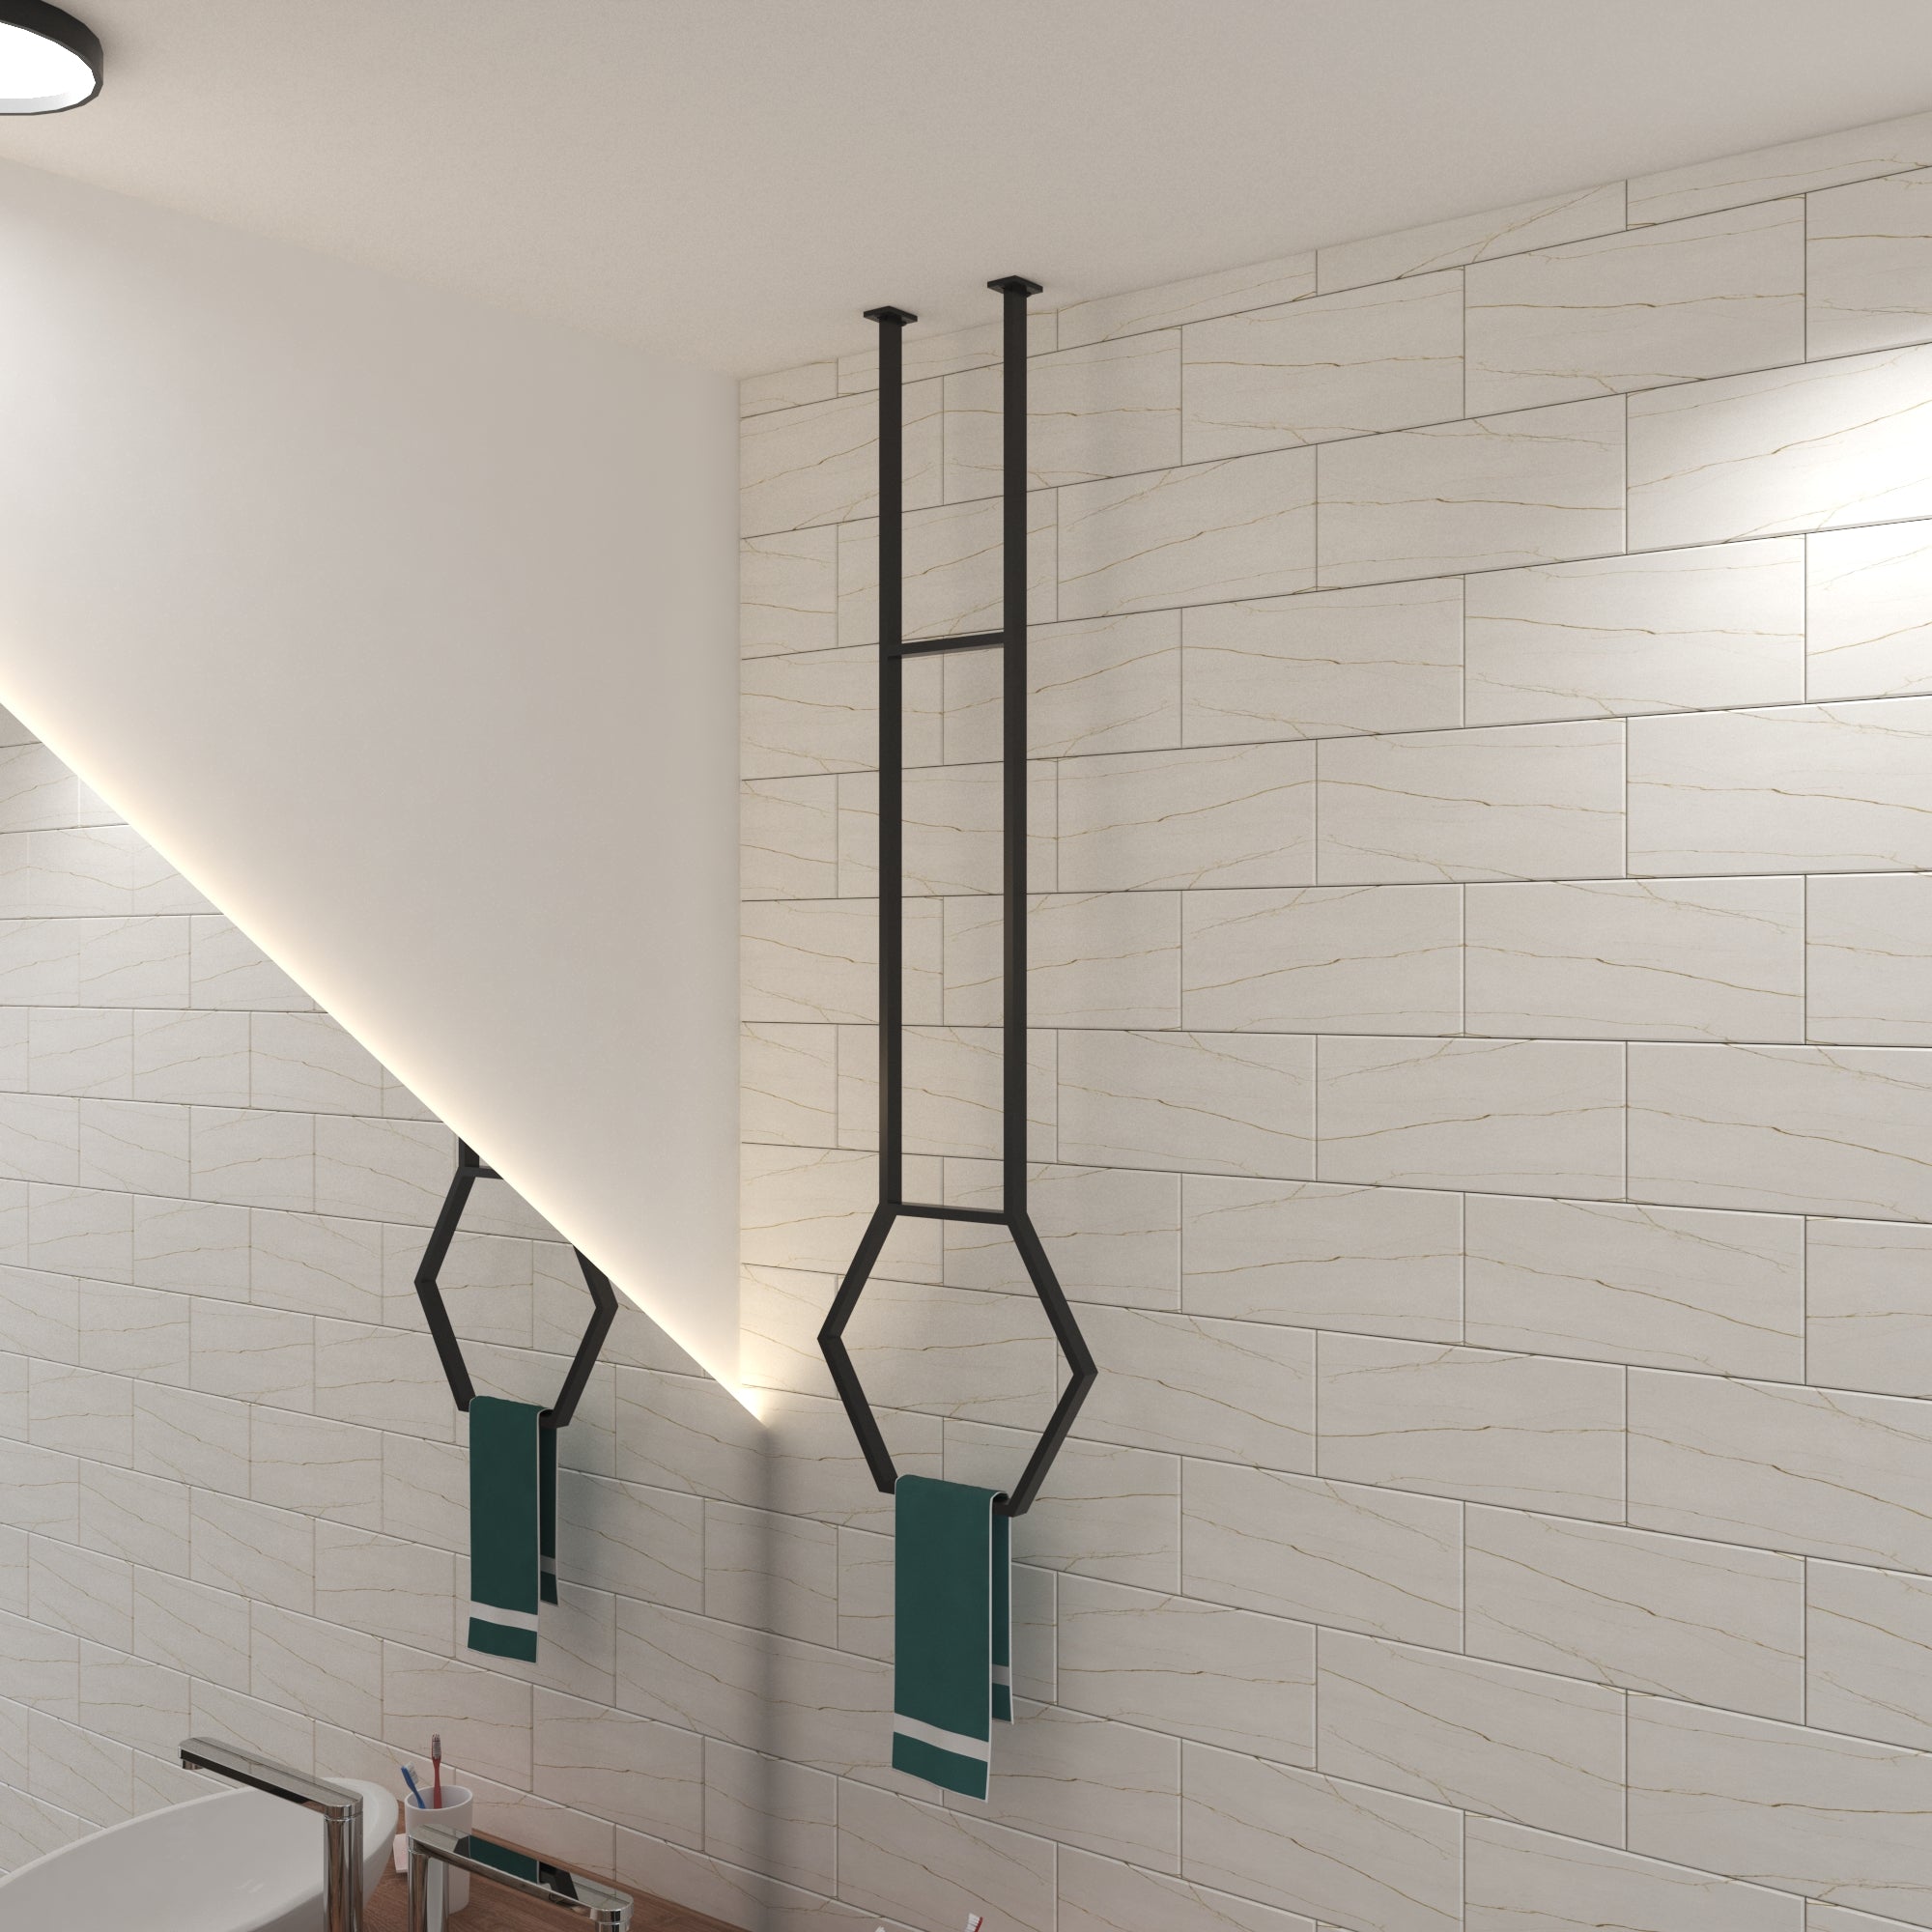 Space-saving hexagonal ceiling rack for hanging towels and robes.